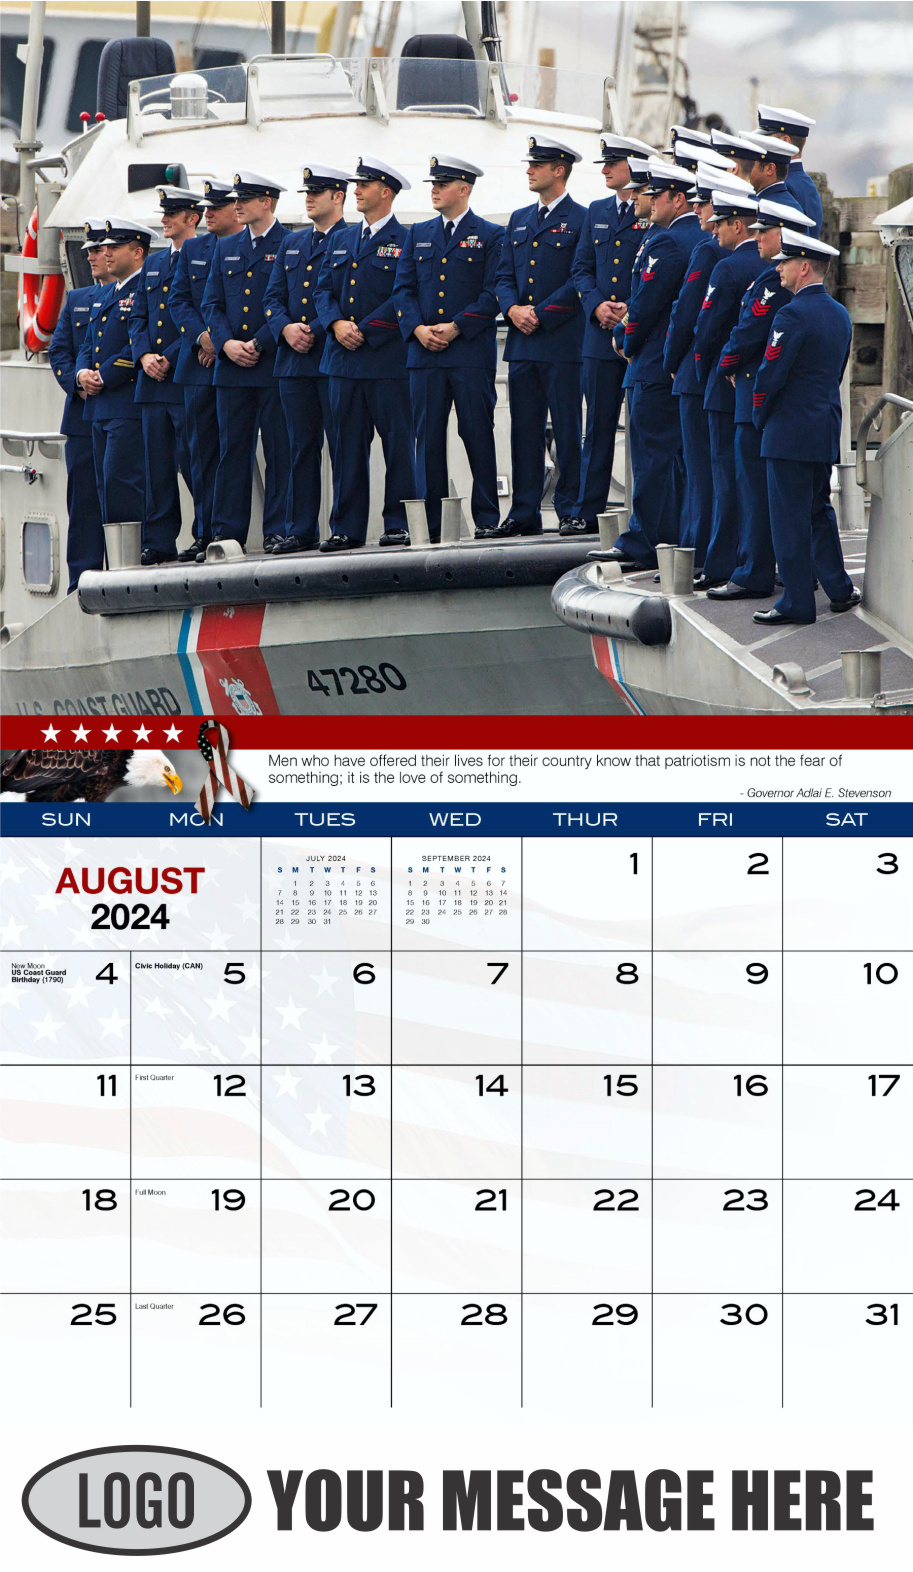 Home of the Brave 2024 USA Armed Forces Business Promo Calendar - August